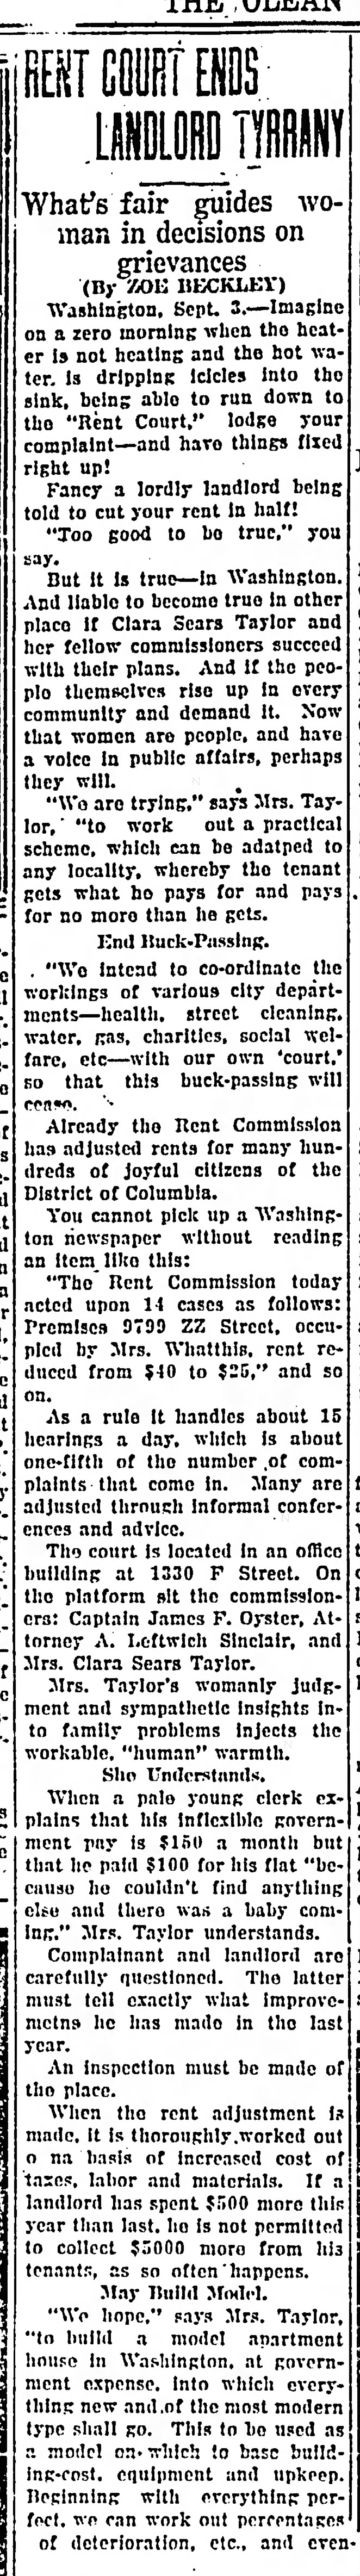 Clara Sears Taylor as Rent Commissioner (1920).